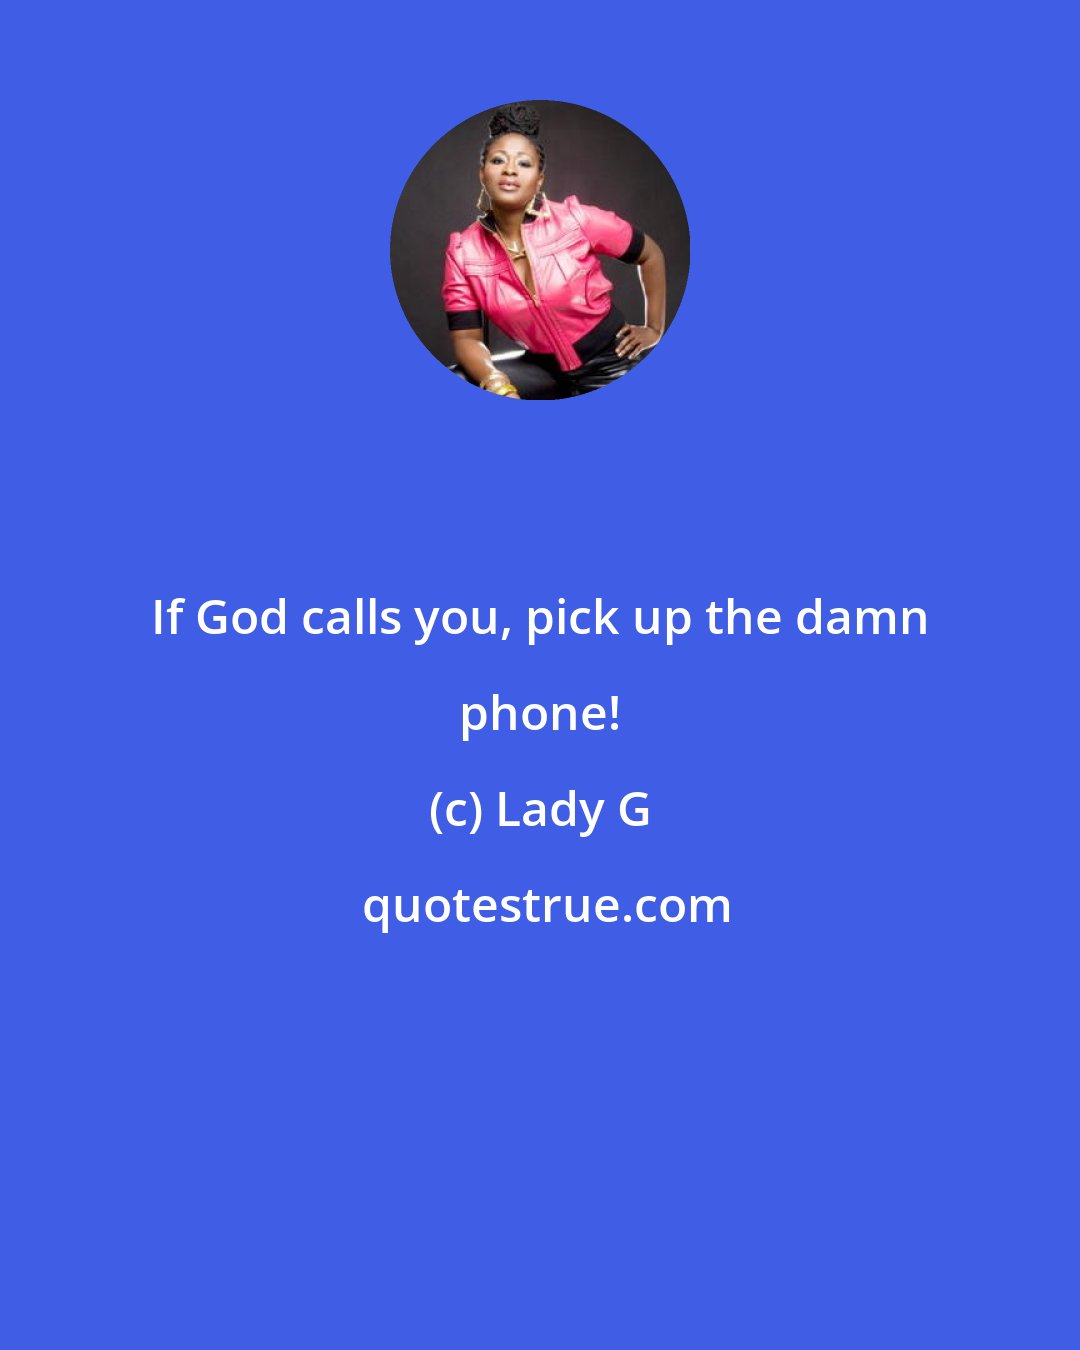 Lady G: If God calls you, pick up the damn phone!